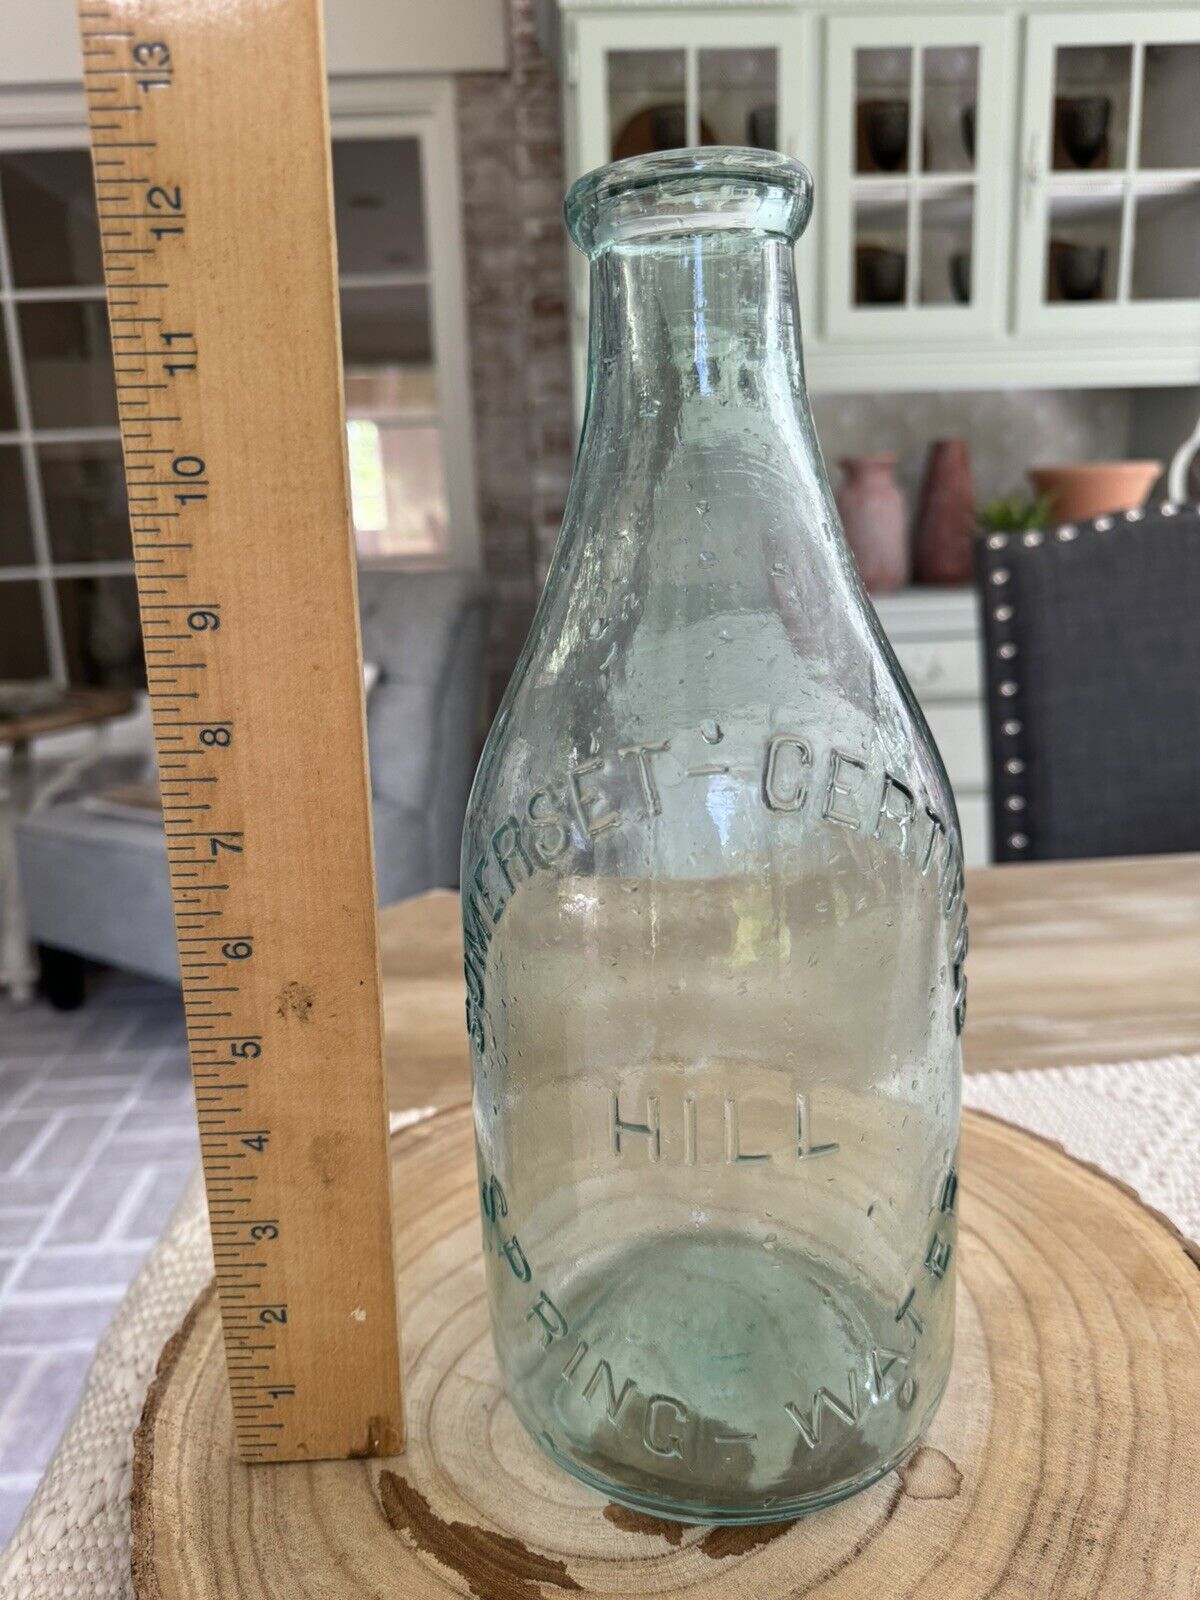 1880s Somerset Hill Certified Spring Water 80 oz